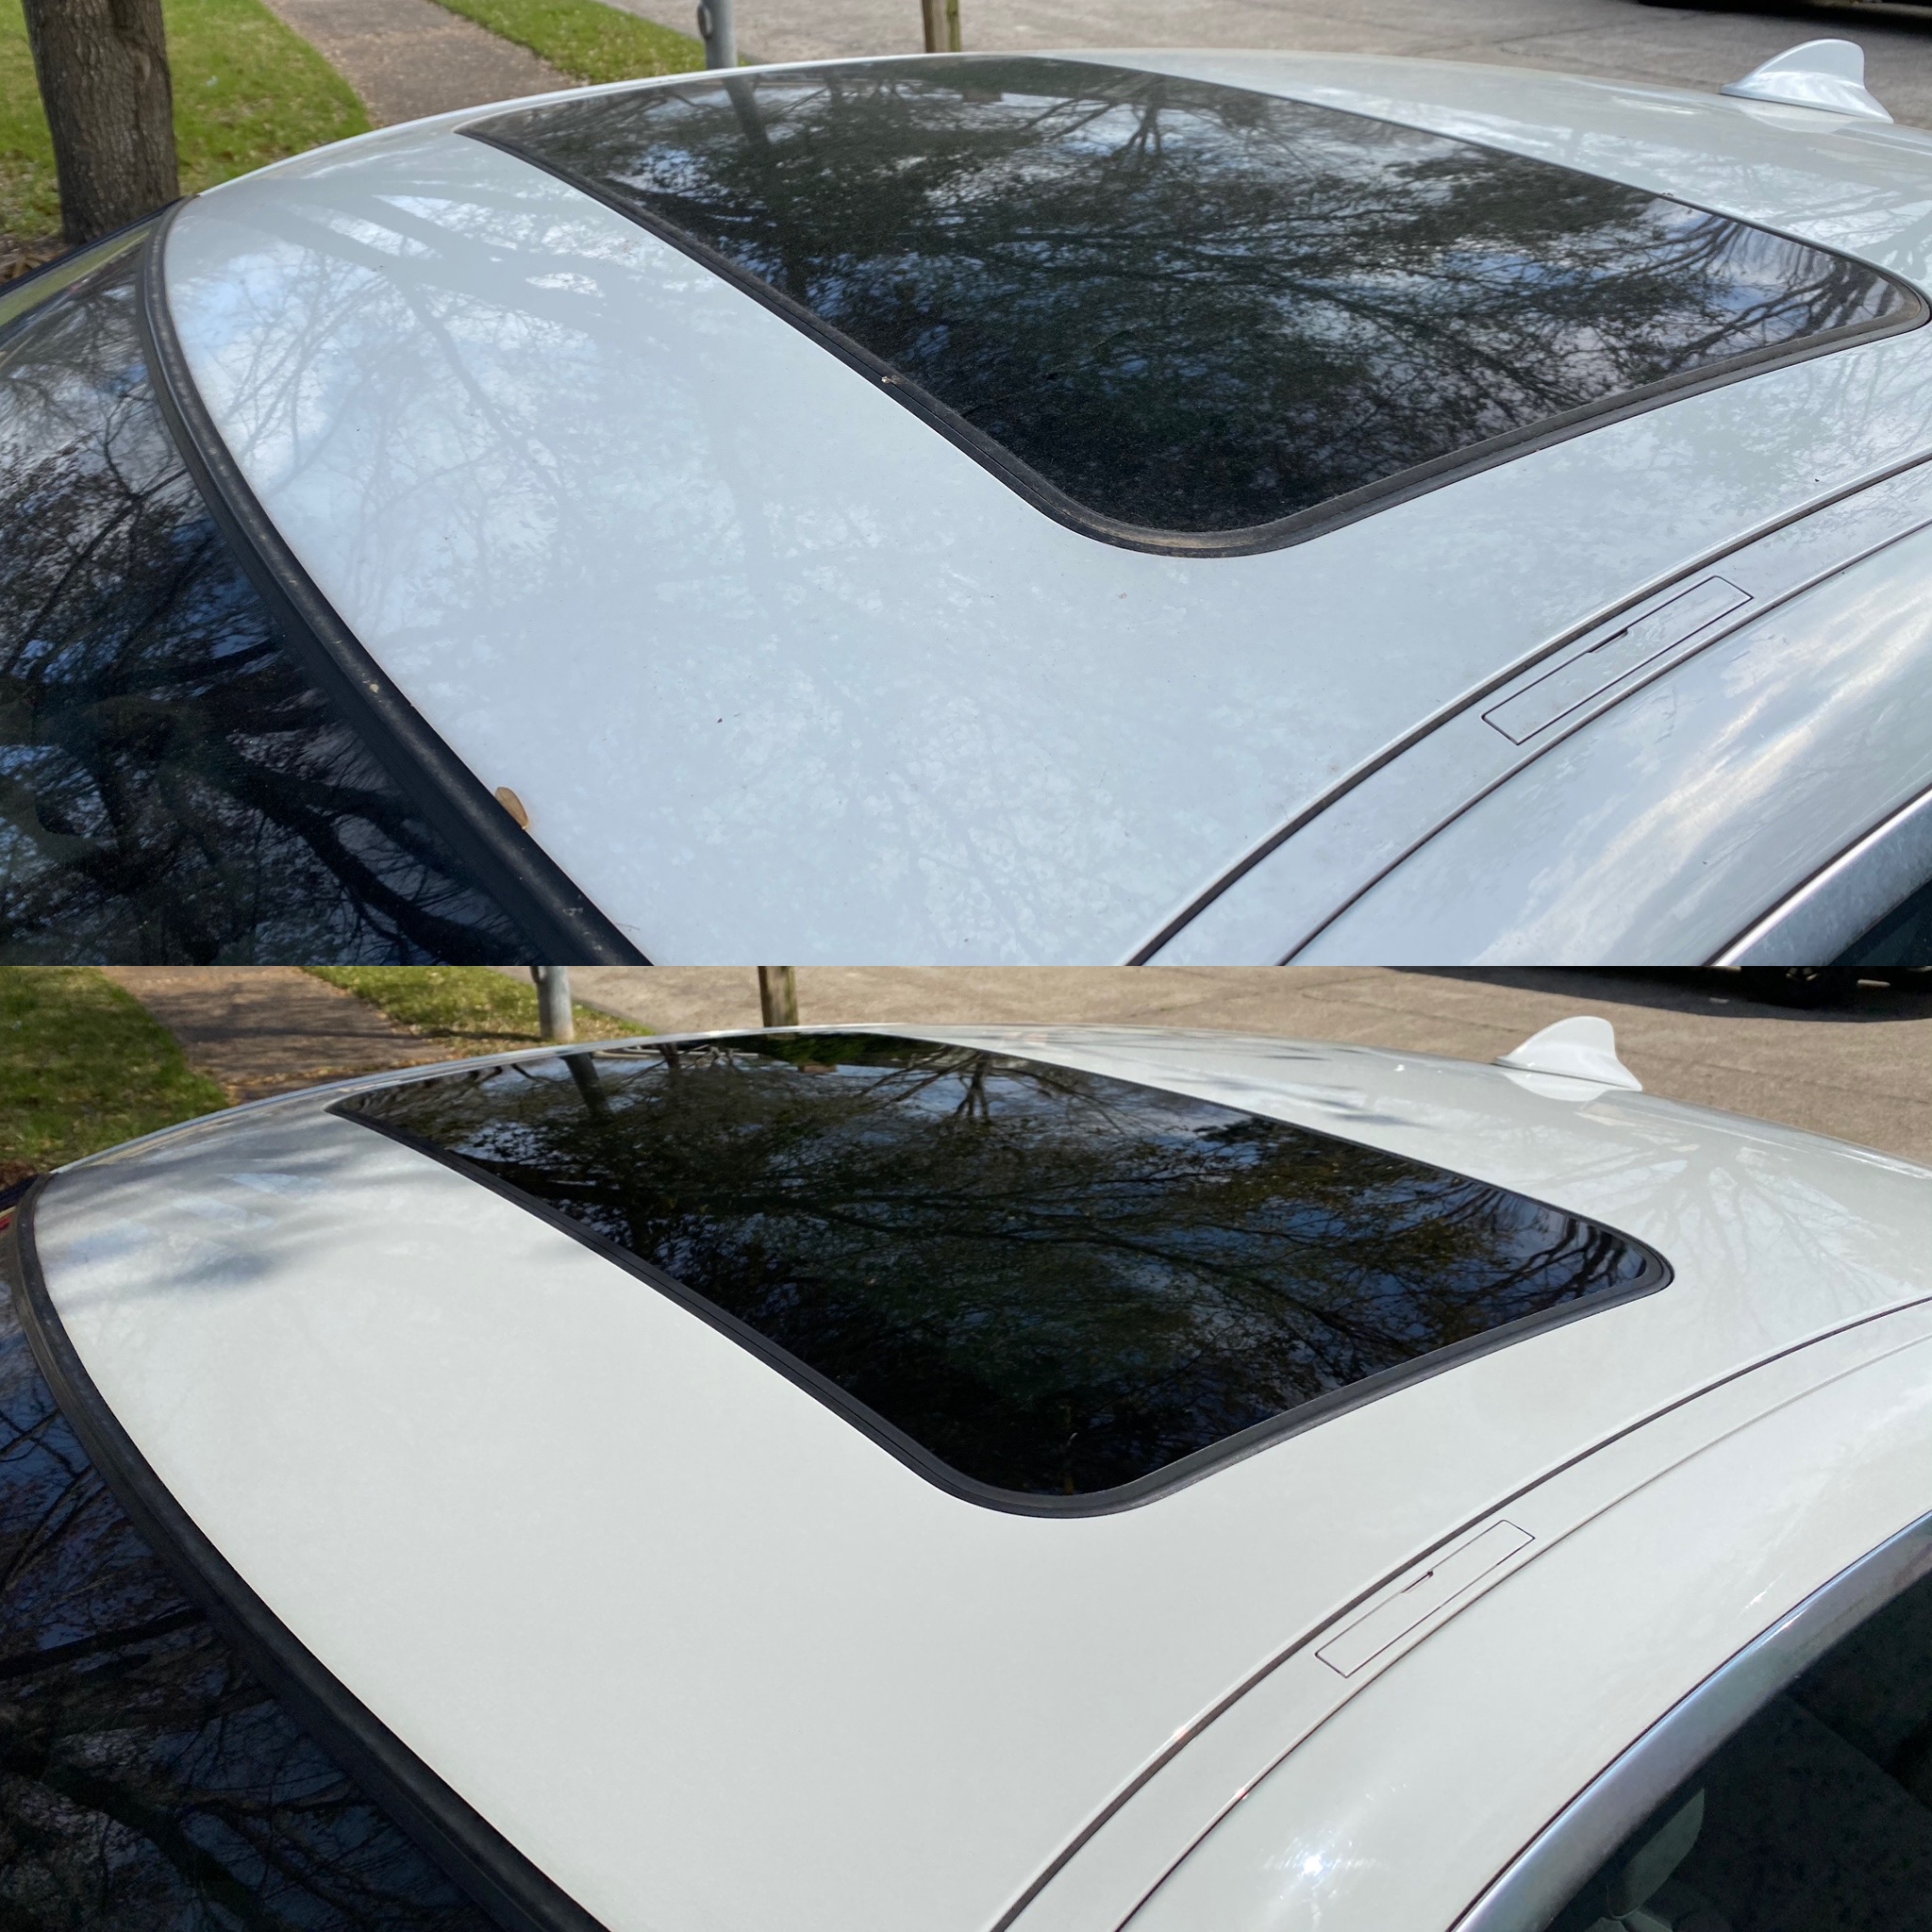 Add Wax To Shine and Protect Your Paint - R3 Detailing in Houston TX